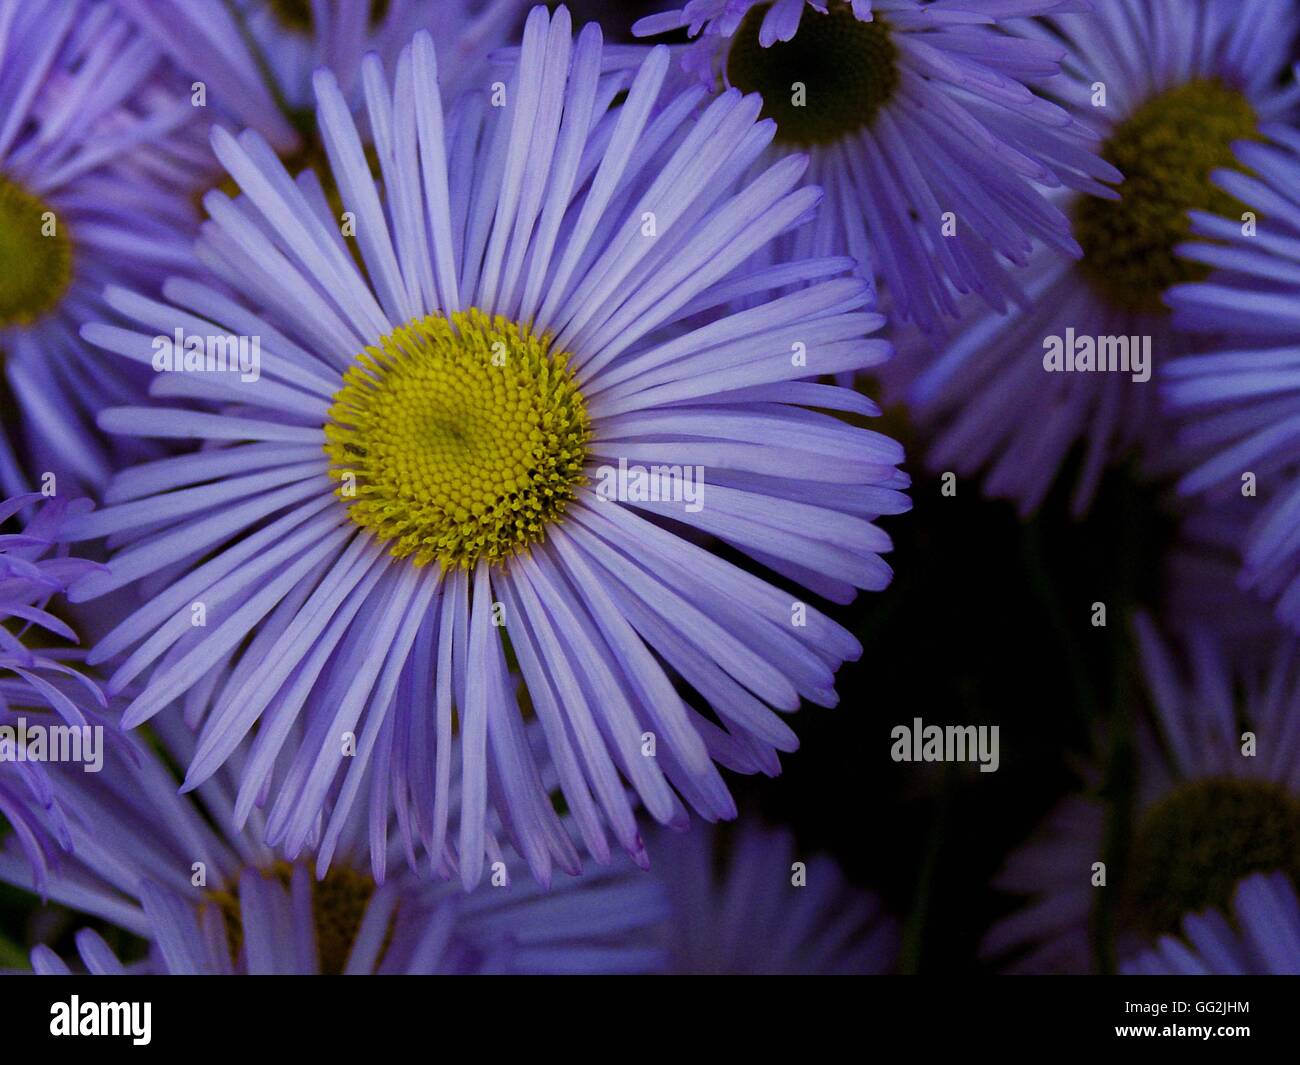 Aster novi-belgii 'Professor Anton Kippenberg'. Also known as the Michaelmas daisy and the New York Aster. the mid-blue flowers with yellow disc florets appear from late summer into autumn. Native to North America. Stock Photo